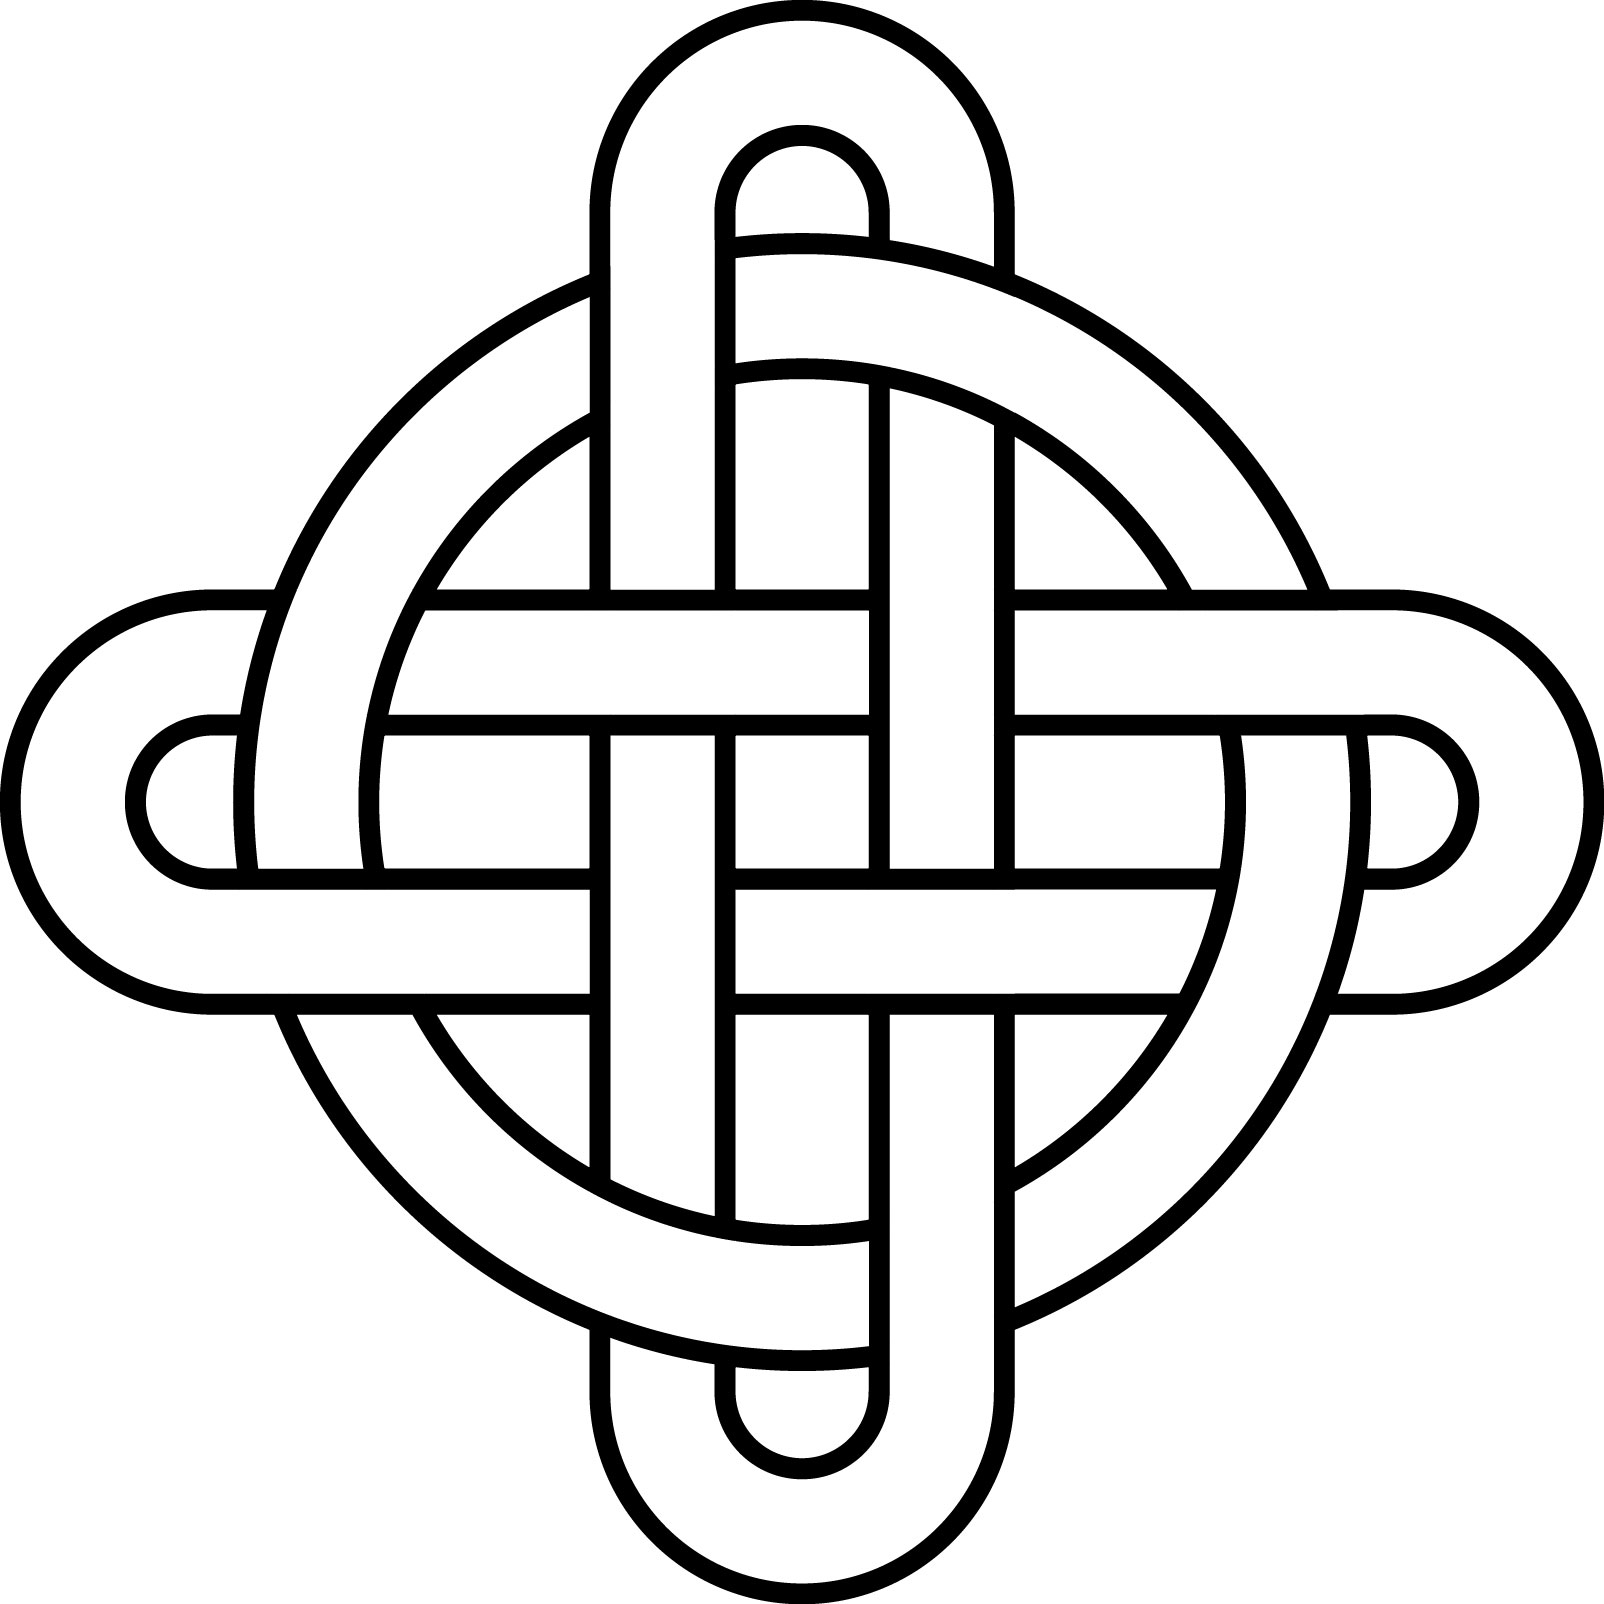 free celtic wedding knot clipart - photo #41